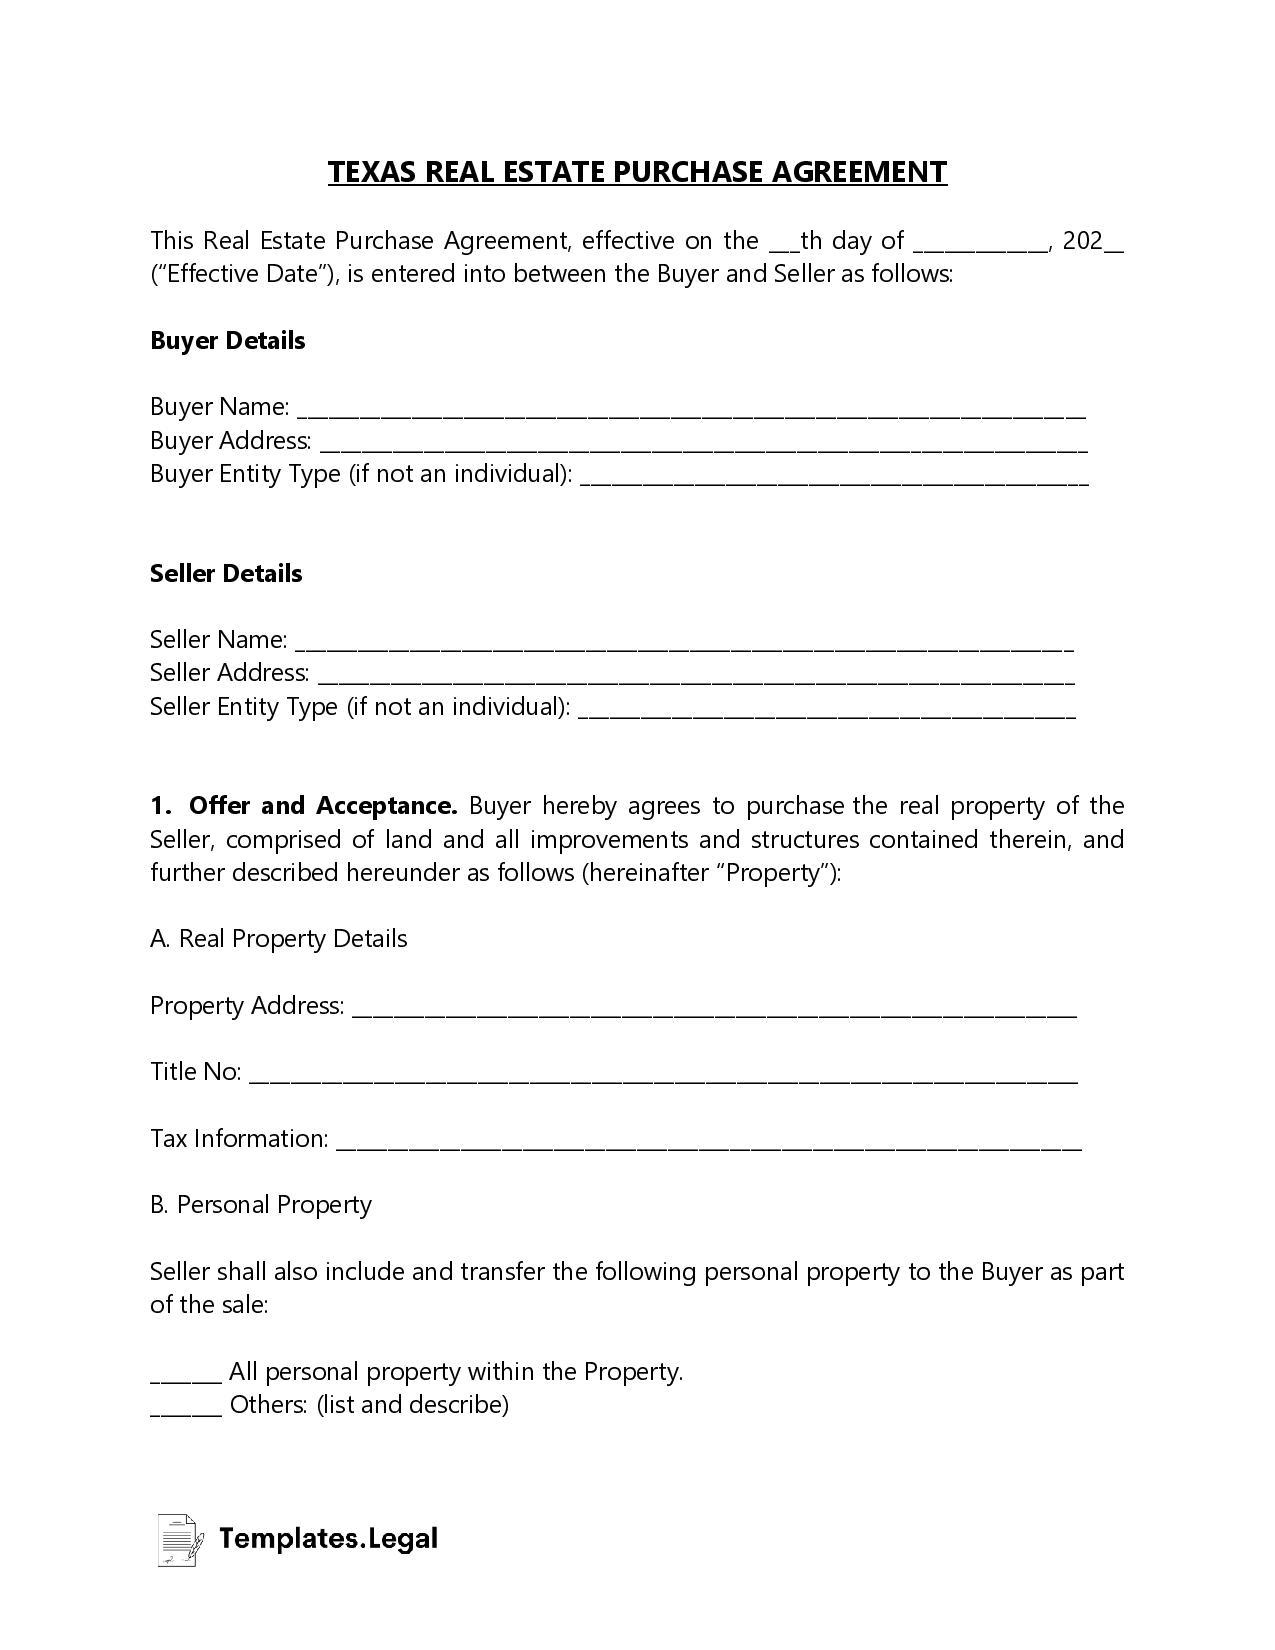 Texas Real Estate Purchase Agreement - Templates.Legal